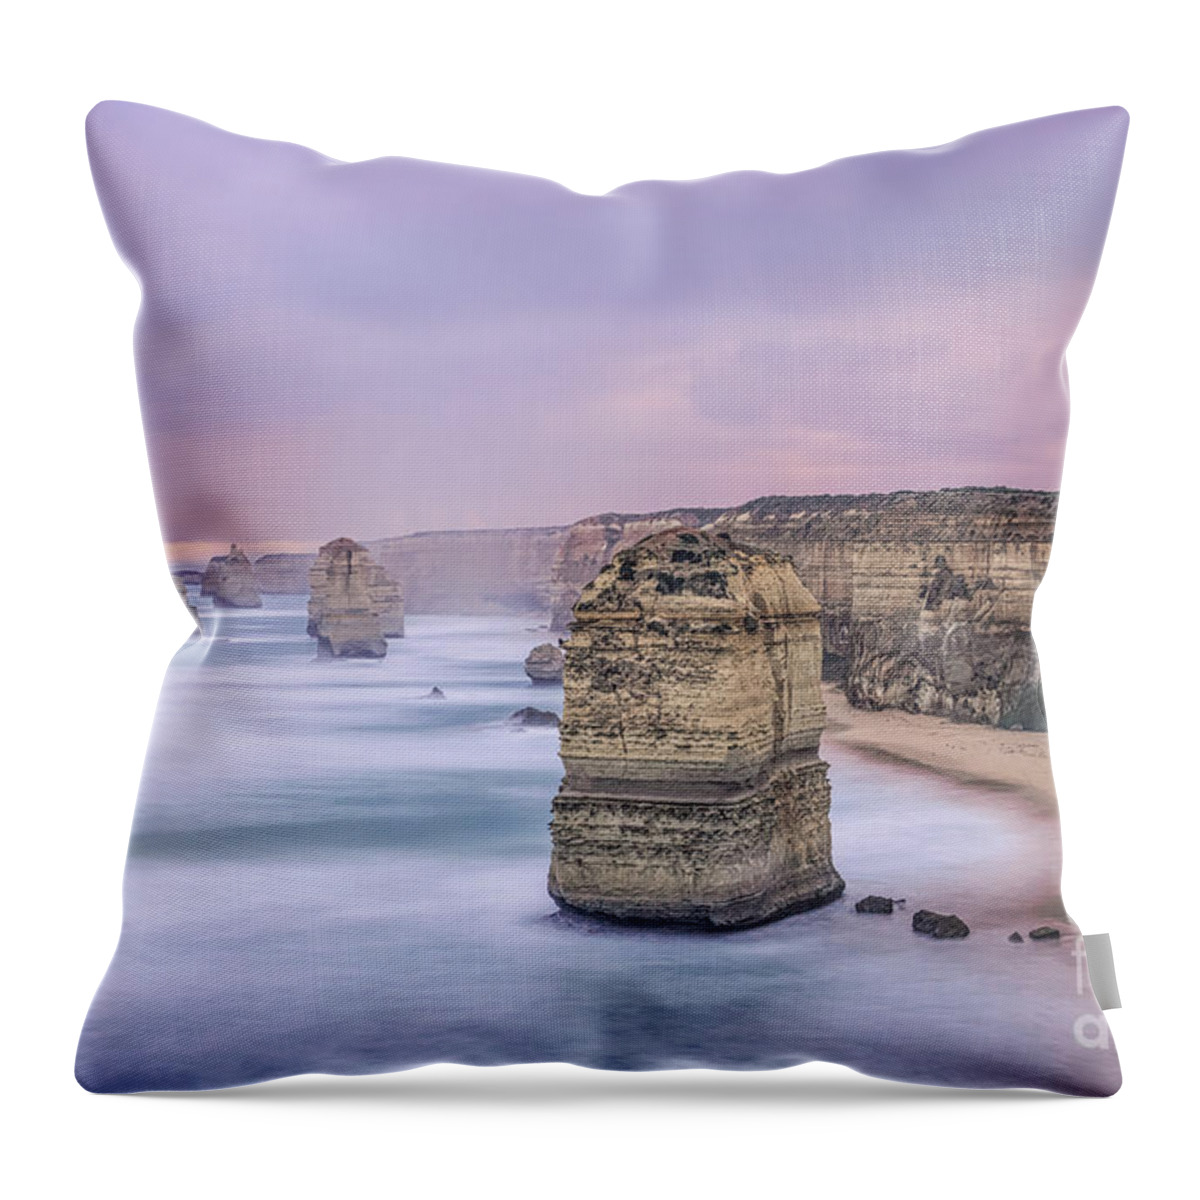 Kremsdorf Throw Pillow featuring the photograph Left In A Dream by Evelina Kremsdorf